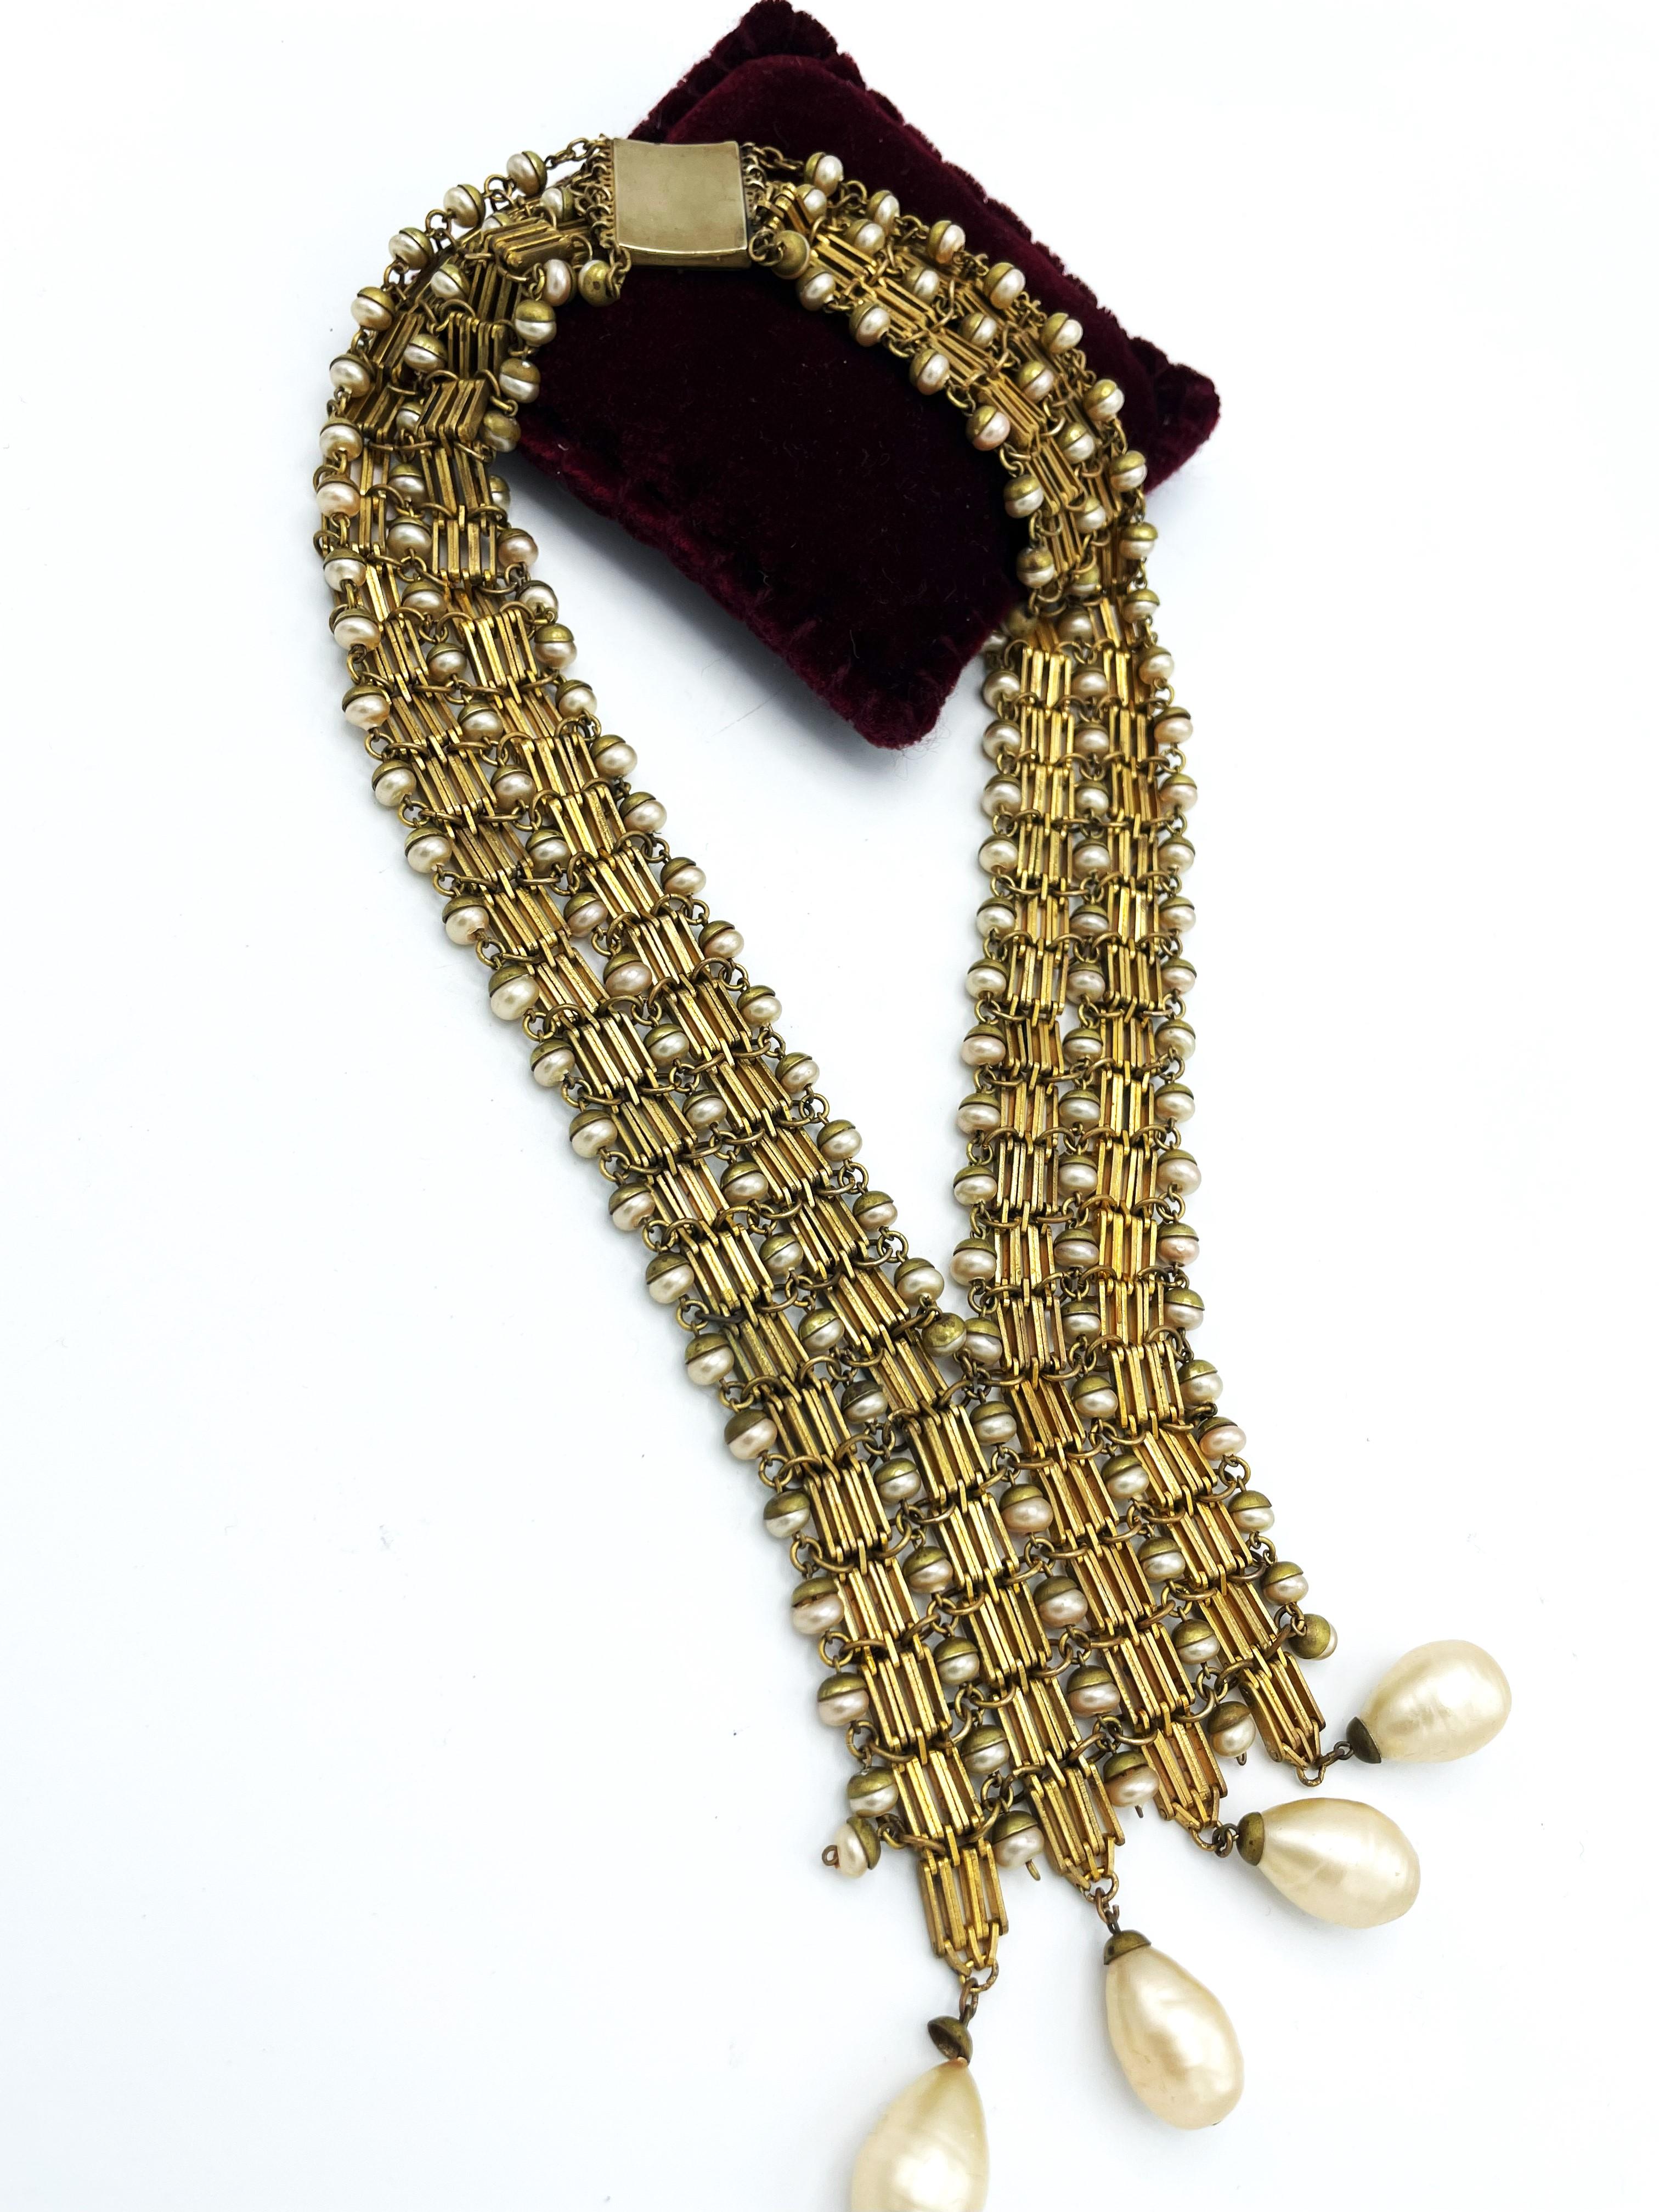  V-SHAPED NECKLACE, early 1940's, gold plated, handmade pearls, Made in France  For Sale 3